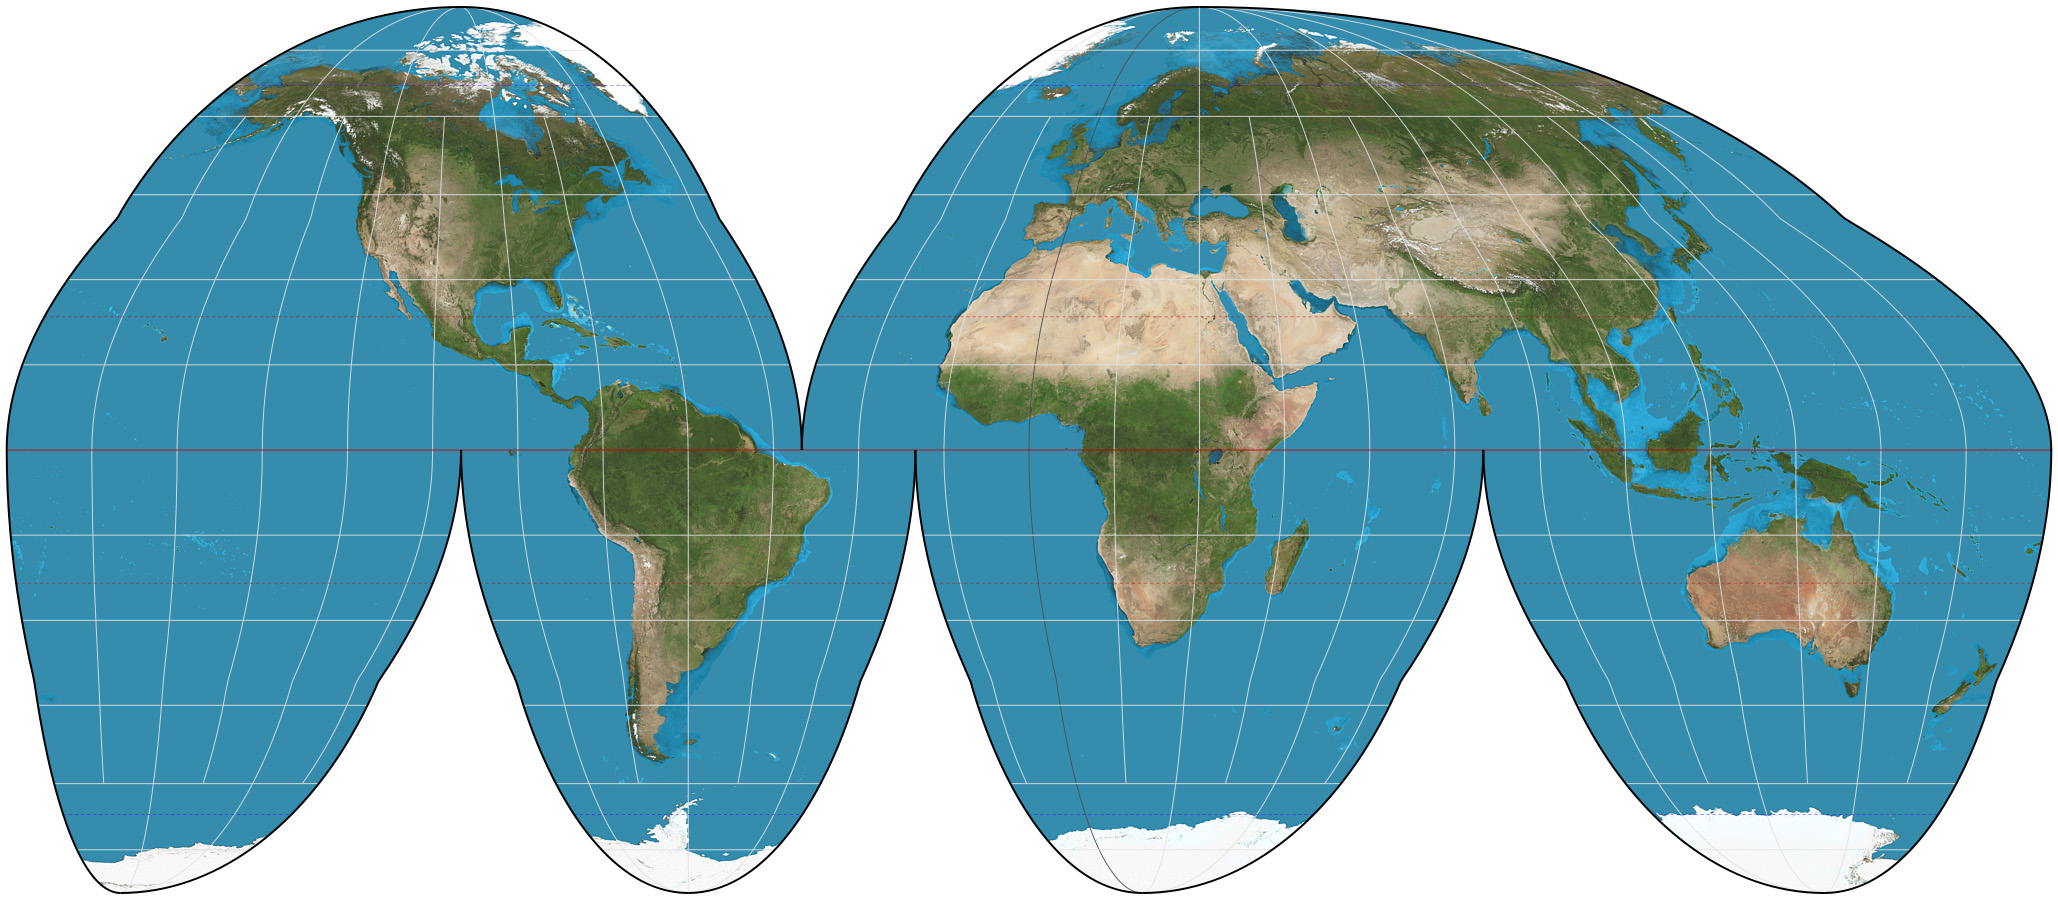 What is the best coordinate system for a world map?